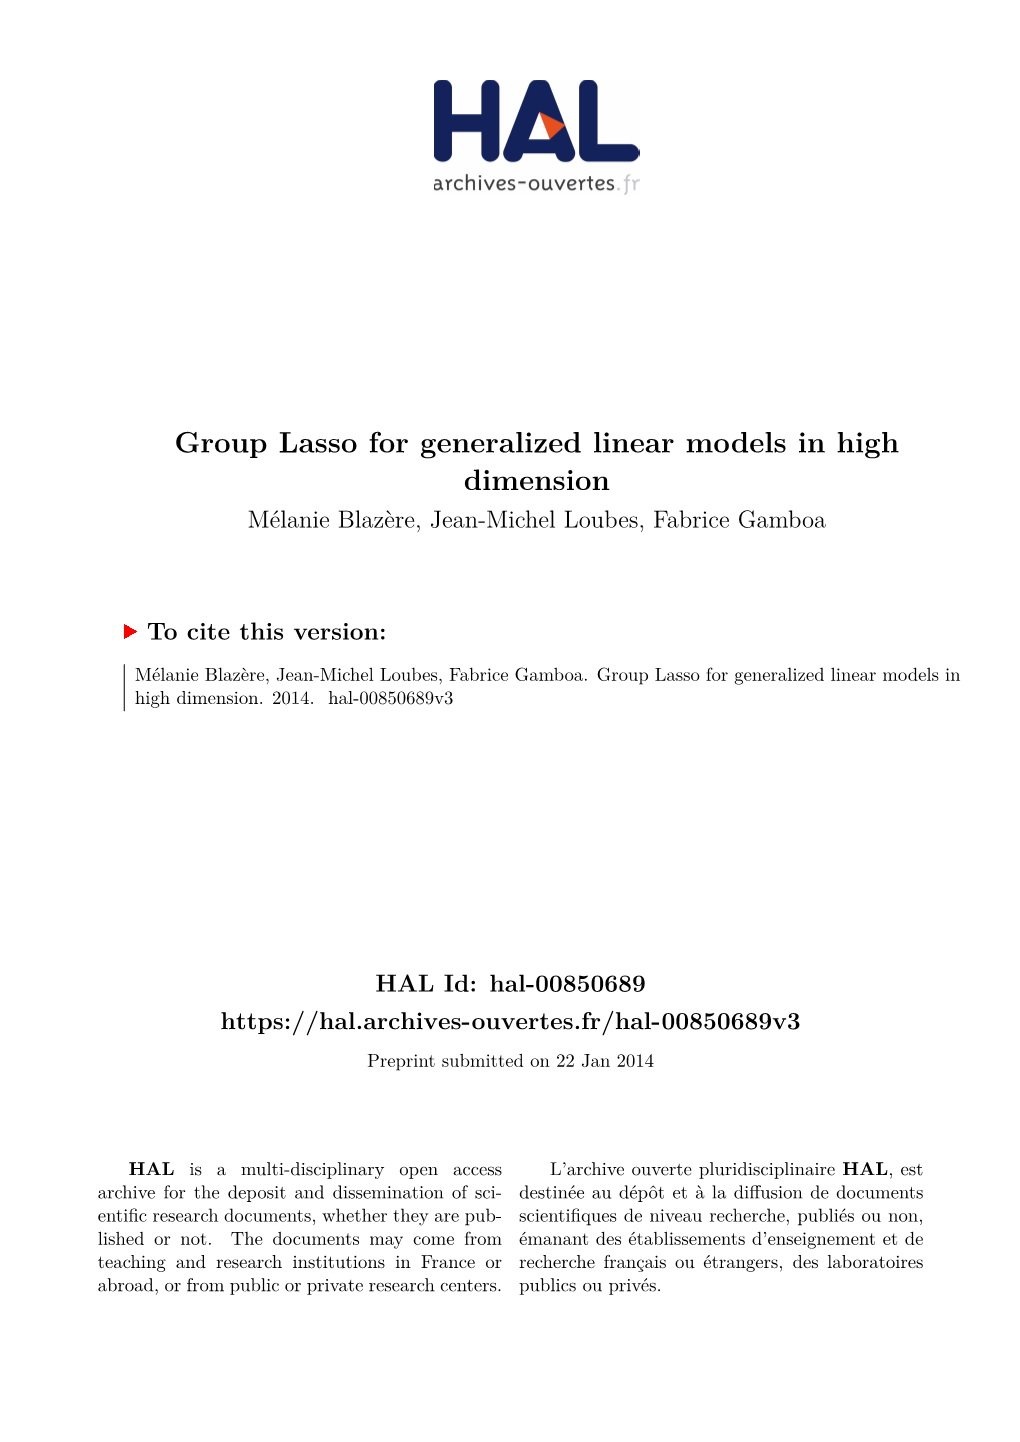 Group Lasso for Generalized Linear Models in High Dimension Mélanie Blazère, Jean-Michel Loubes, Fabrice Gamboa